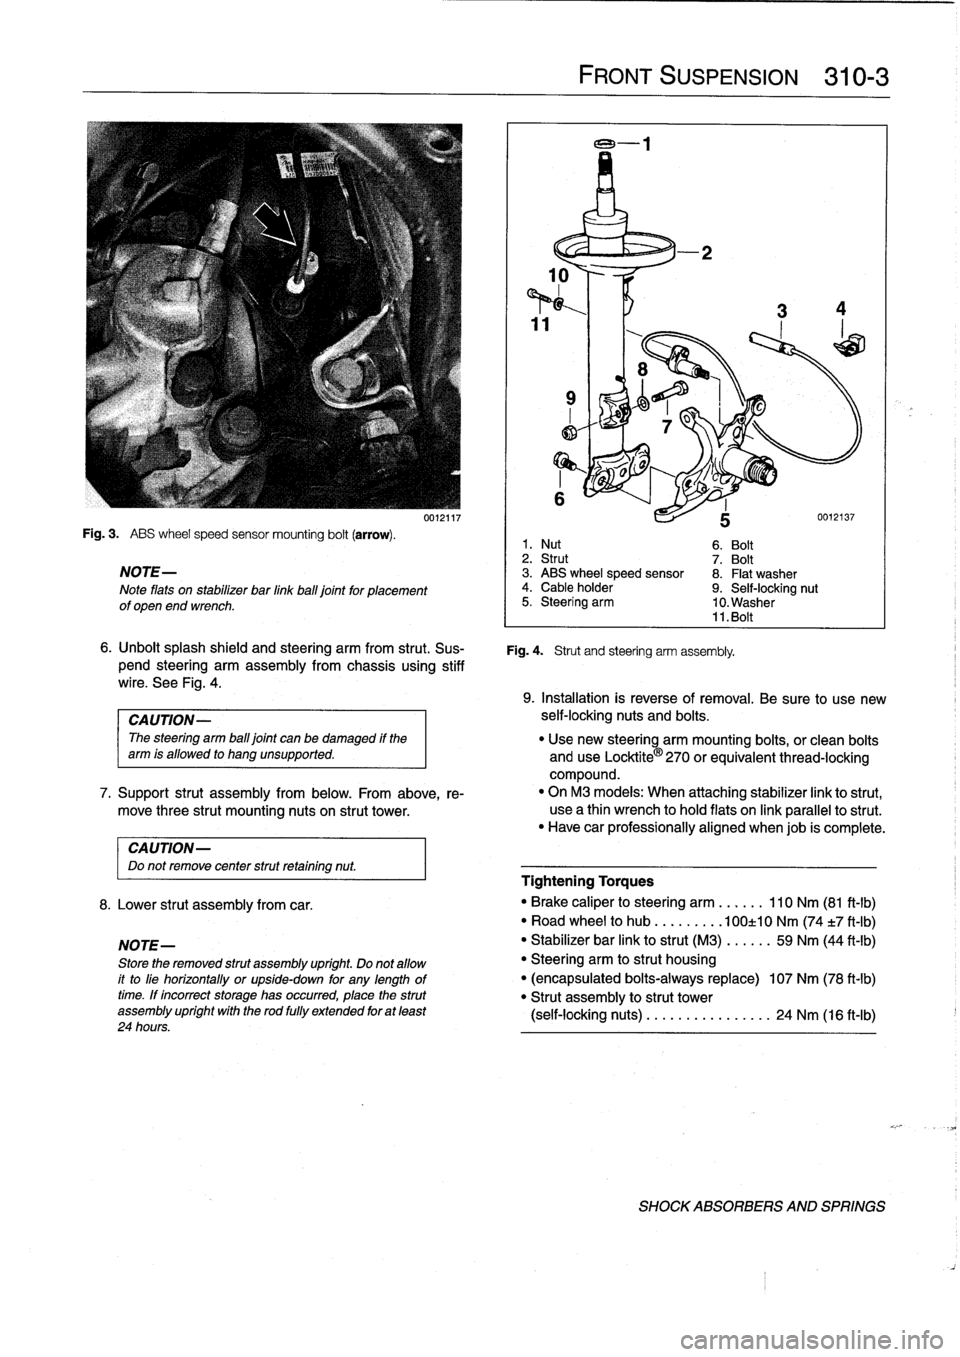 BMW 328i 1995 E36 Workshop Manual 
Fig
.
3
.

	

ABS
wheel
speed
sensor
mounting
bolt
(arrow)
.

NOTE-

Note
flats
on
stabilizer
bar
linkball
joint
for
placement
of
open
end
wrench
.

CAUTION-
Do
not
remove
center
strut
retaining
nut
